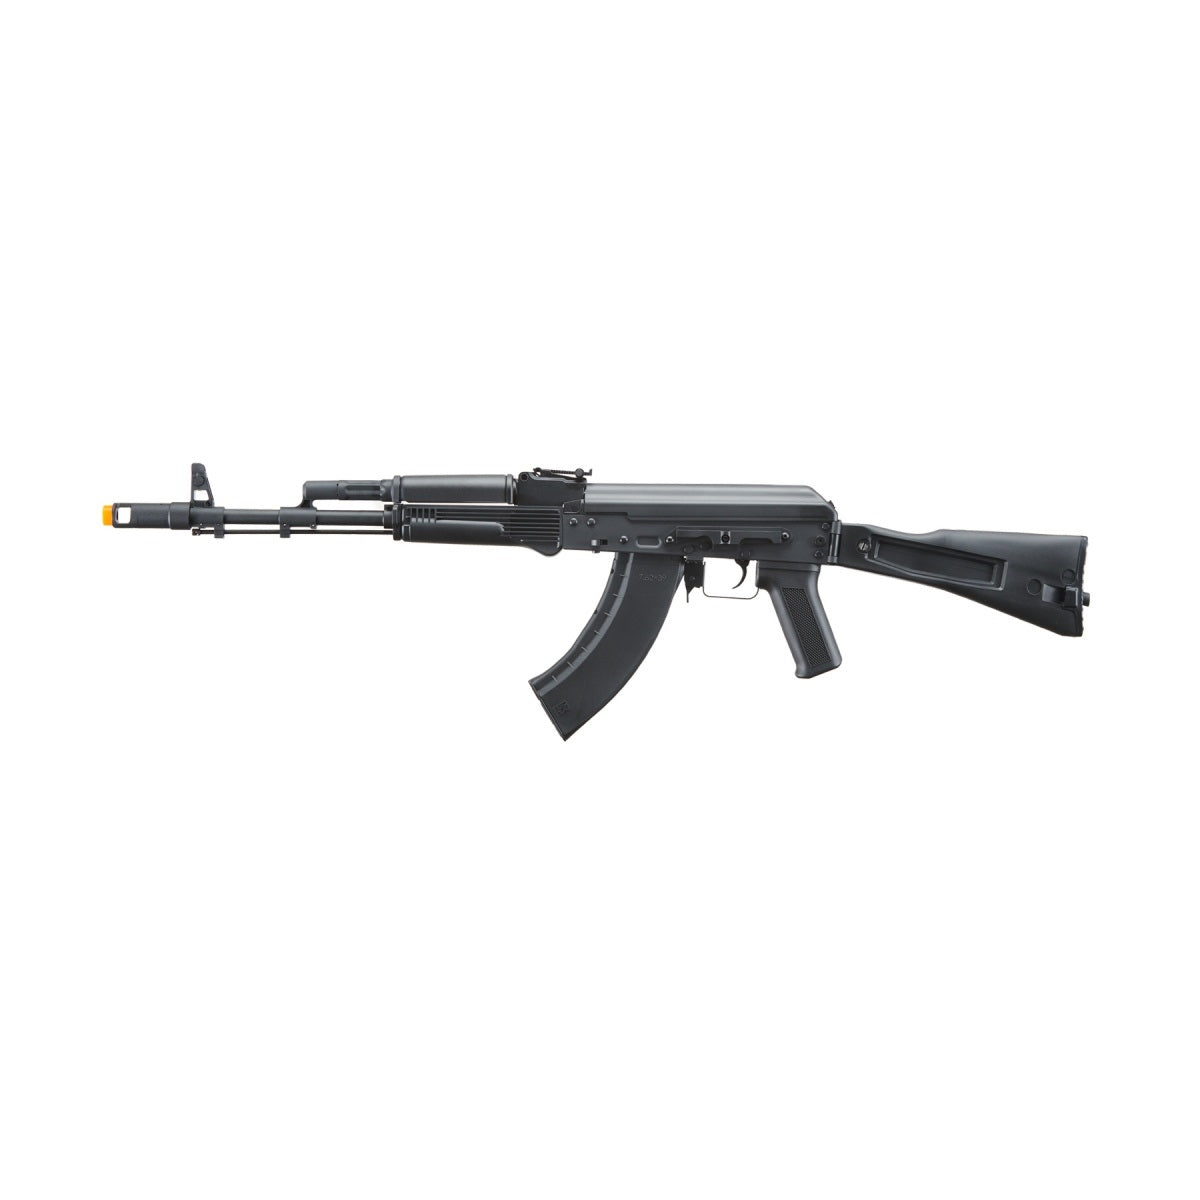 Lancer Tactical x Kalashnikov USA Licensed KR-103 Airsoft AEG Rifle with Folding Stock (Color: Black) - ssairsoft